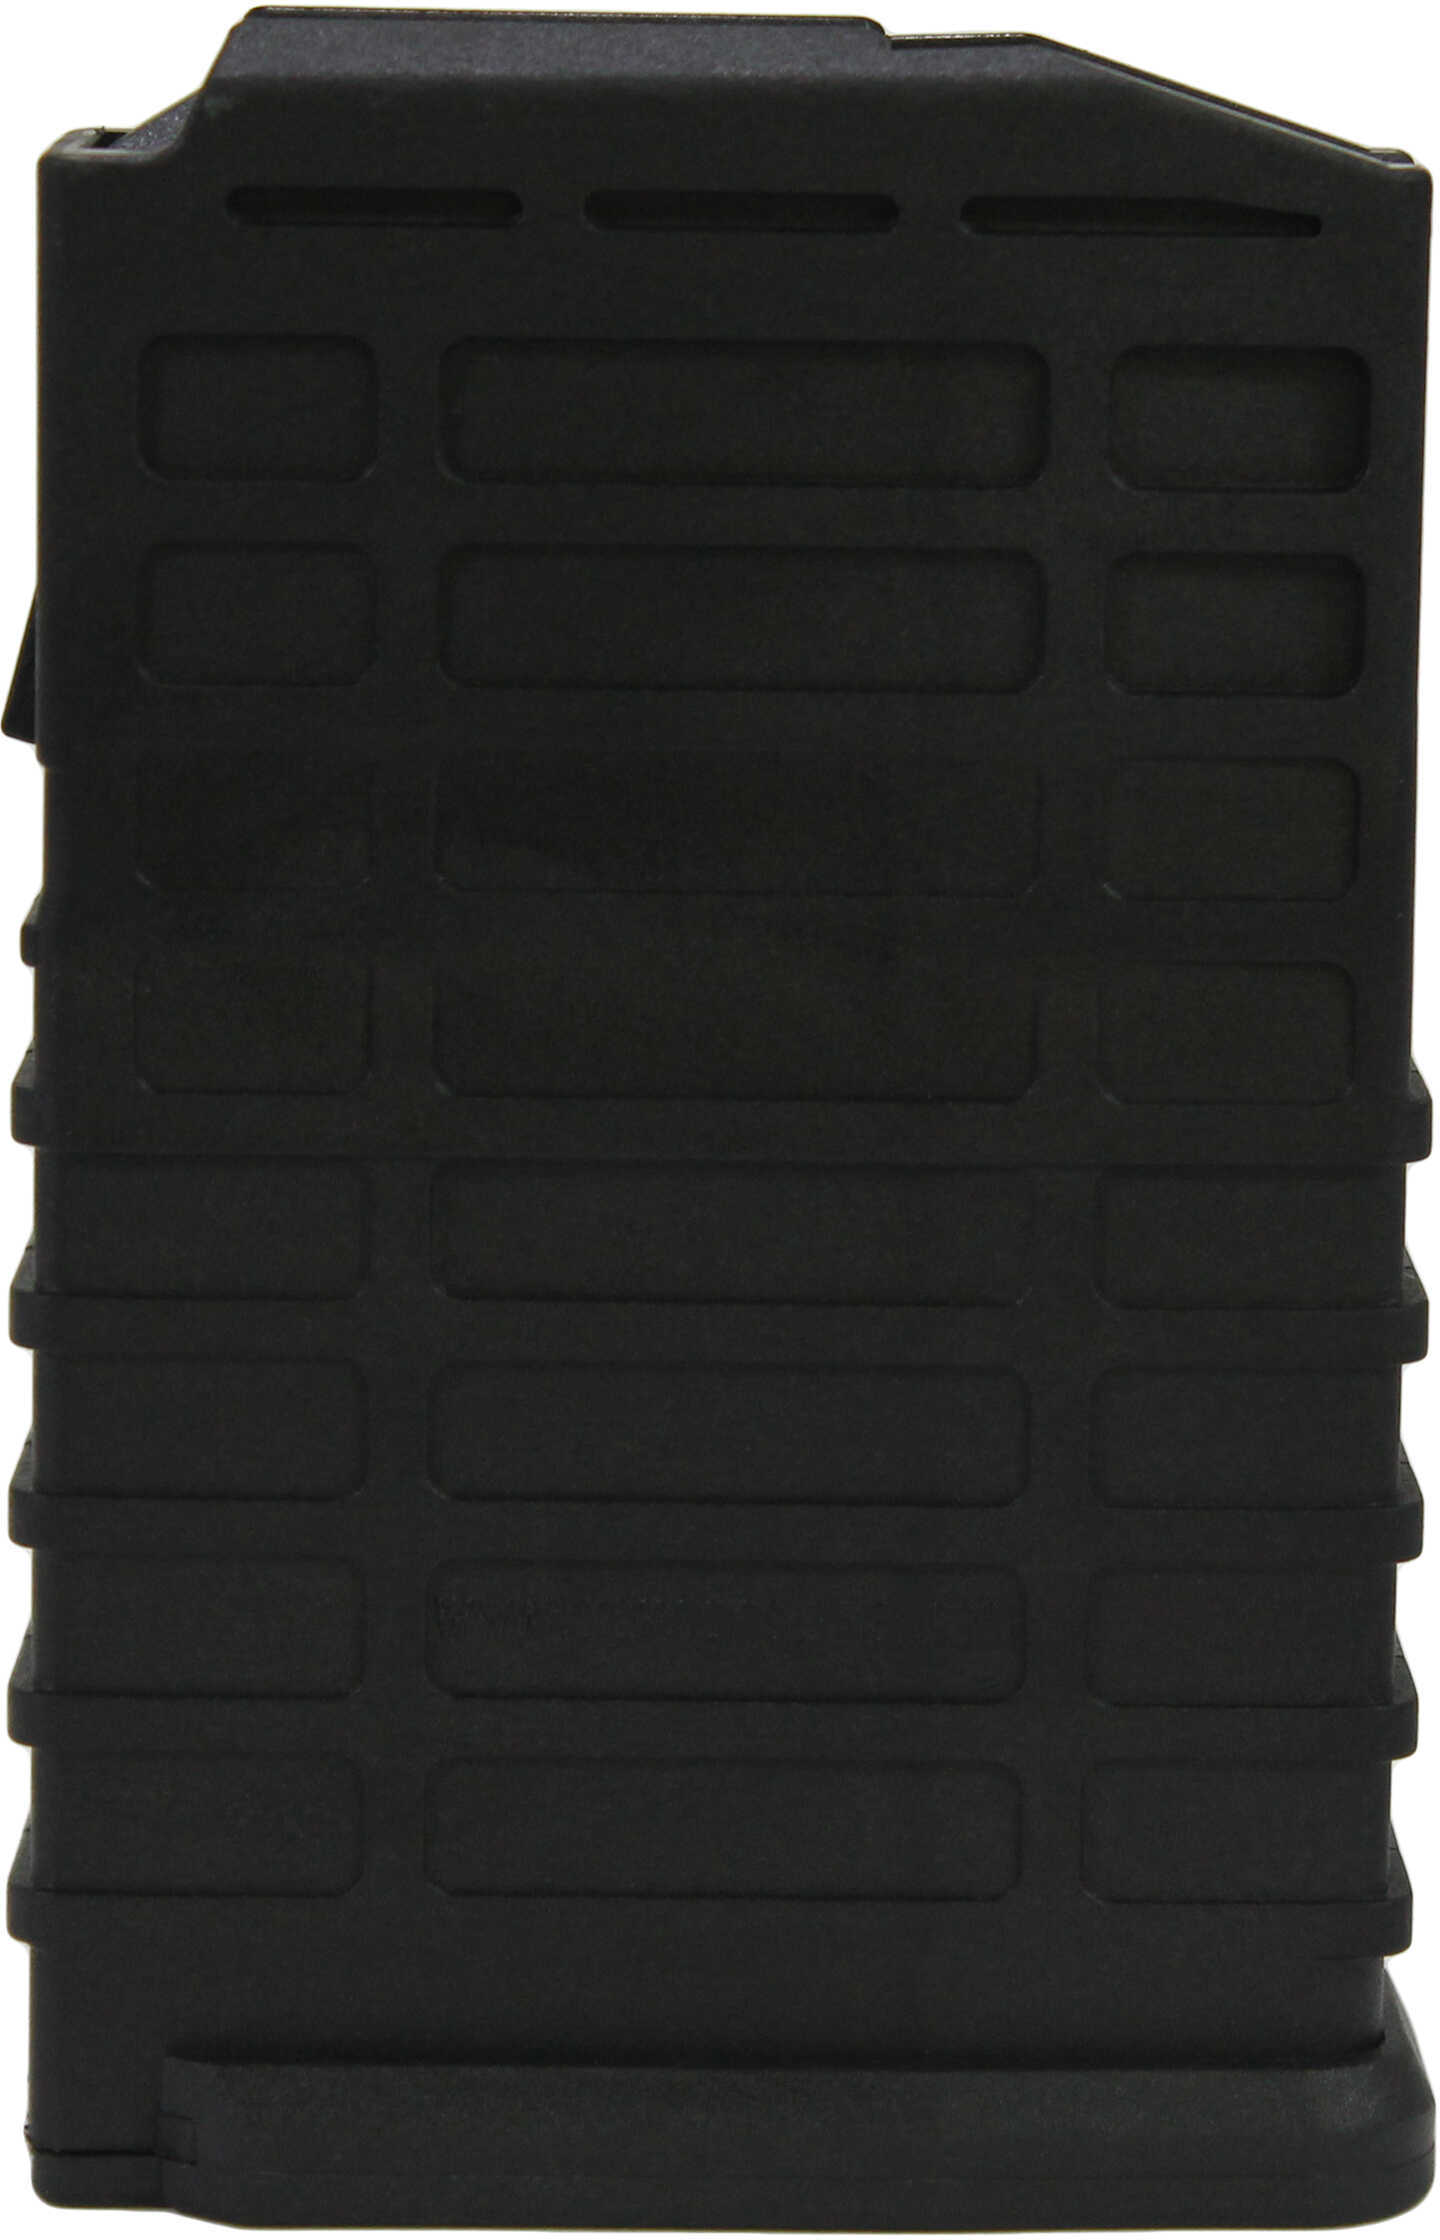 Pro Rug22 Scout Mag 308 10Rd Poly-img-1